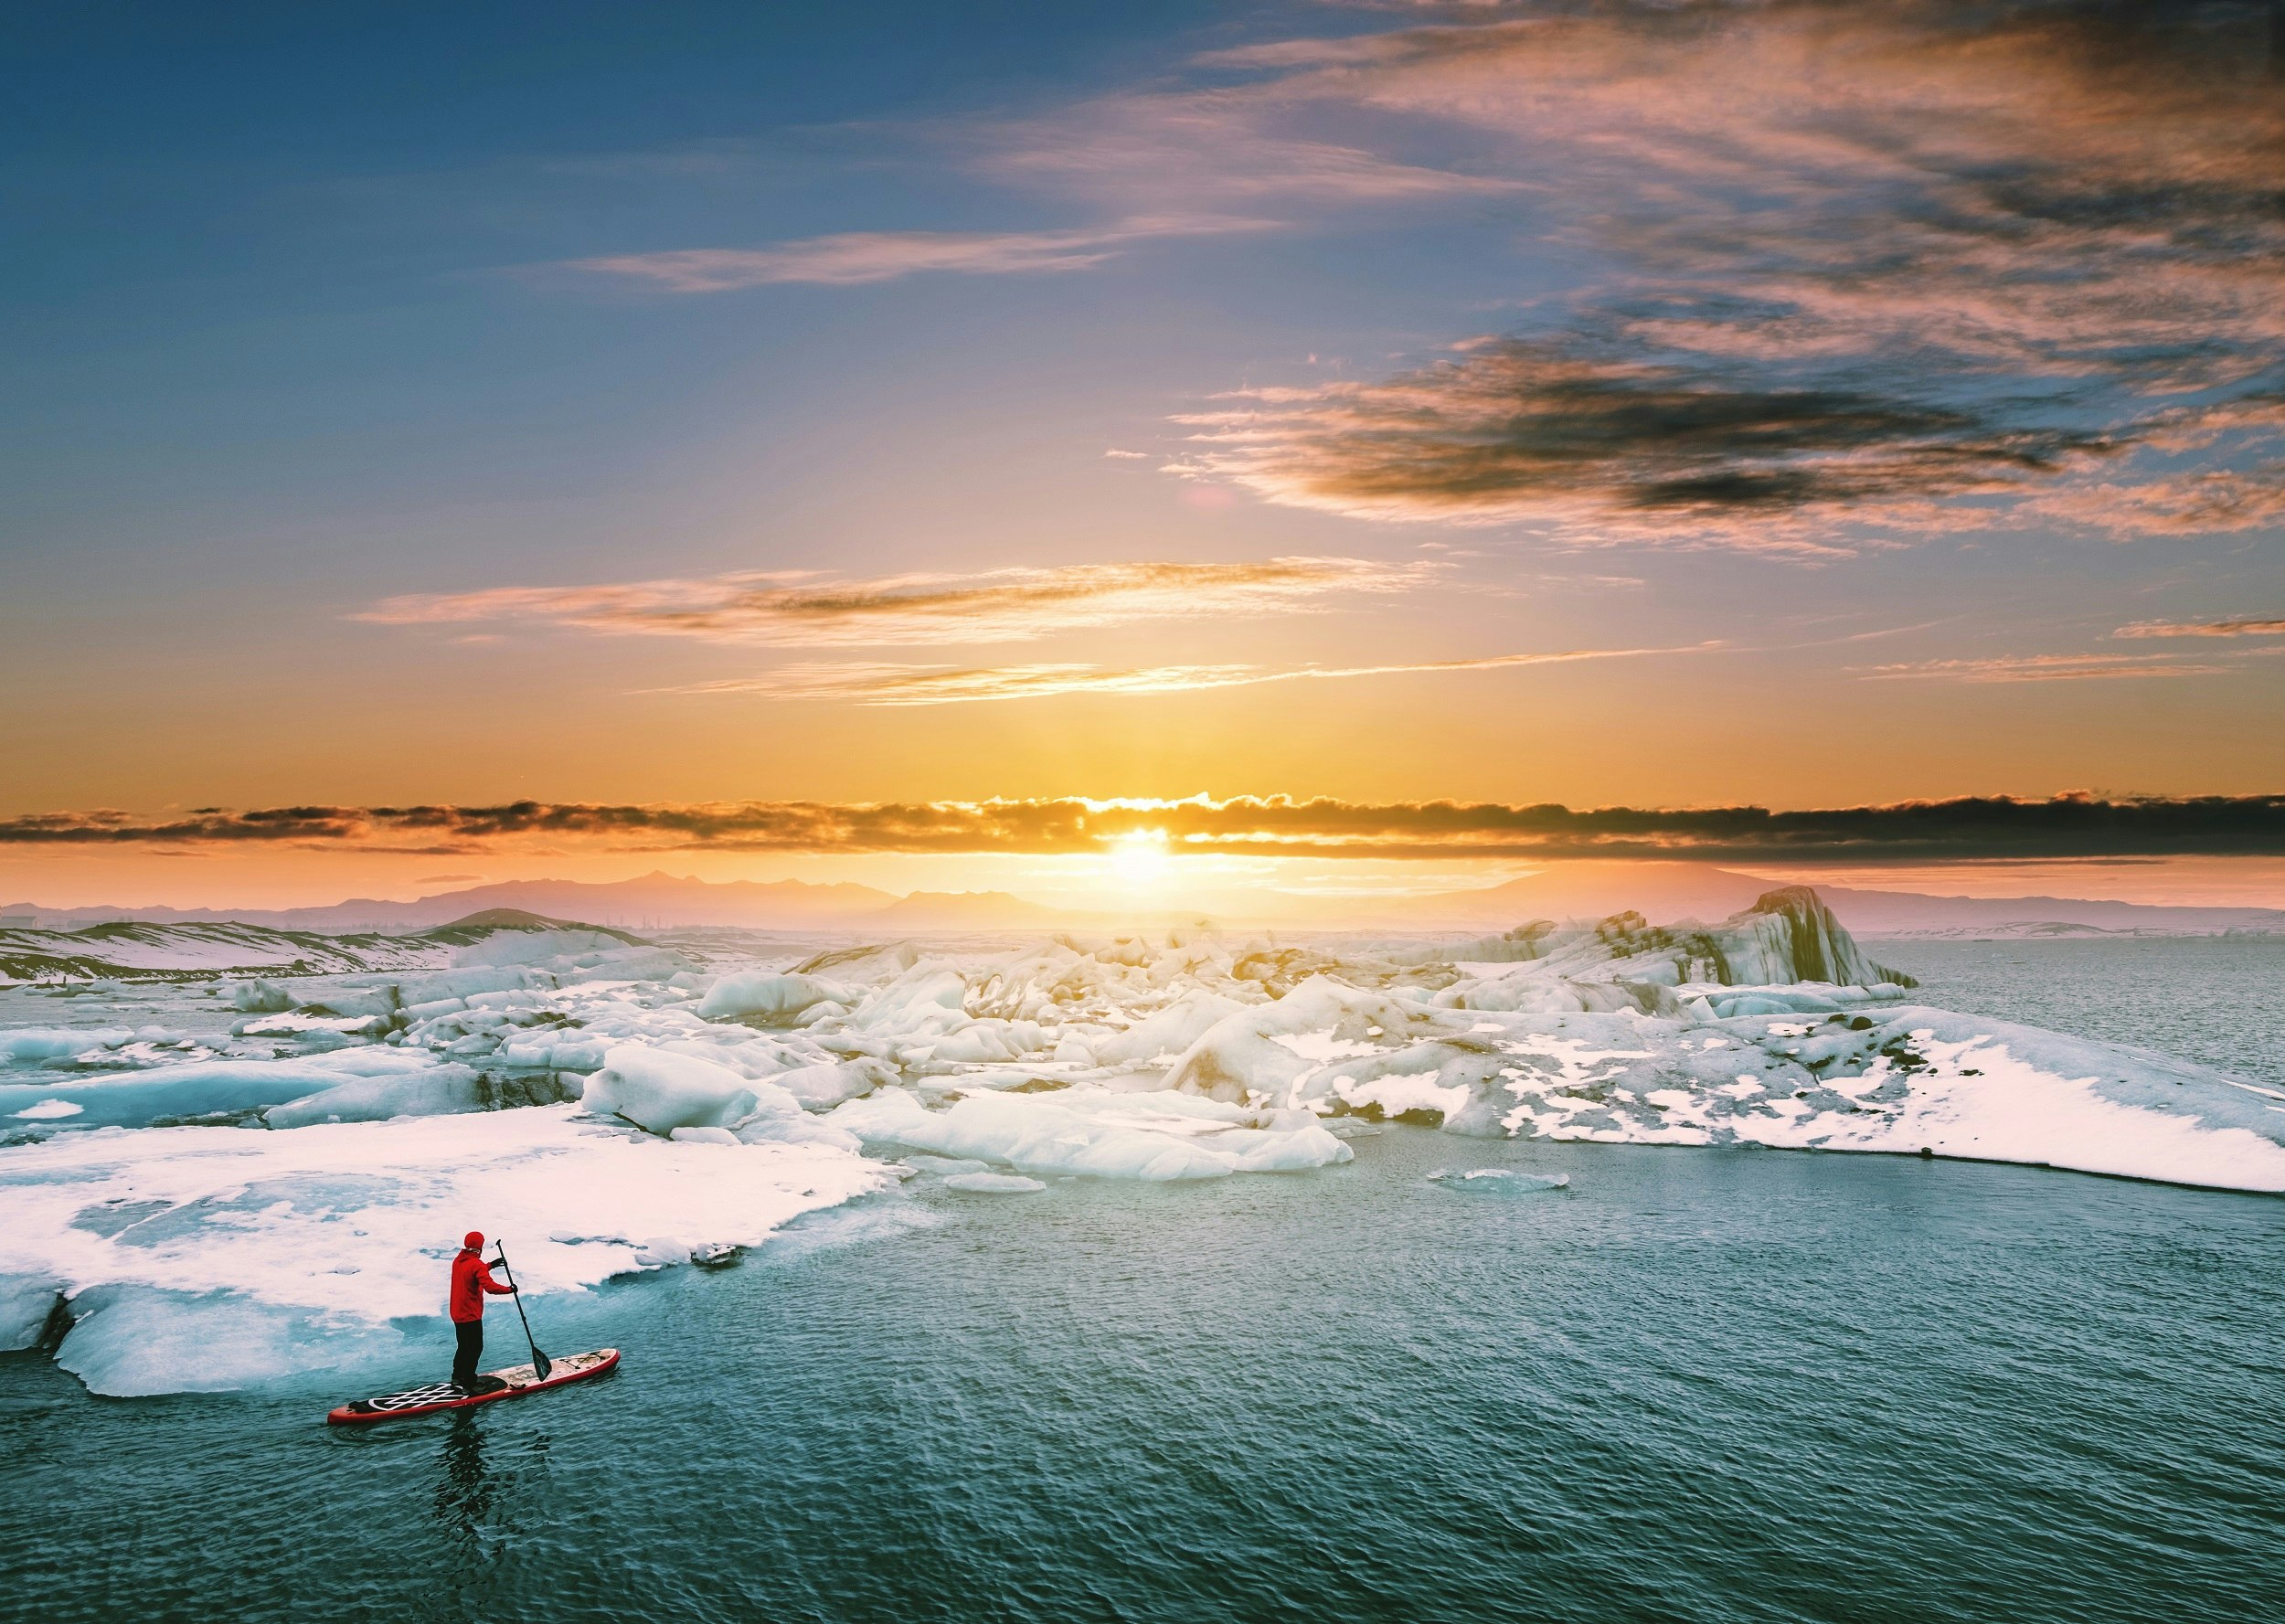 A lone stand-up paddleboarder in survival gear makes their way along the edge of a glacier in the sea, with the sun setting behind some clouds in the distance.